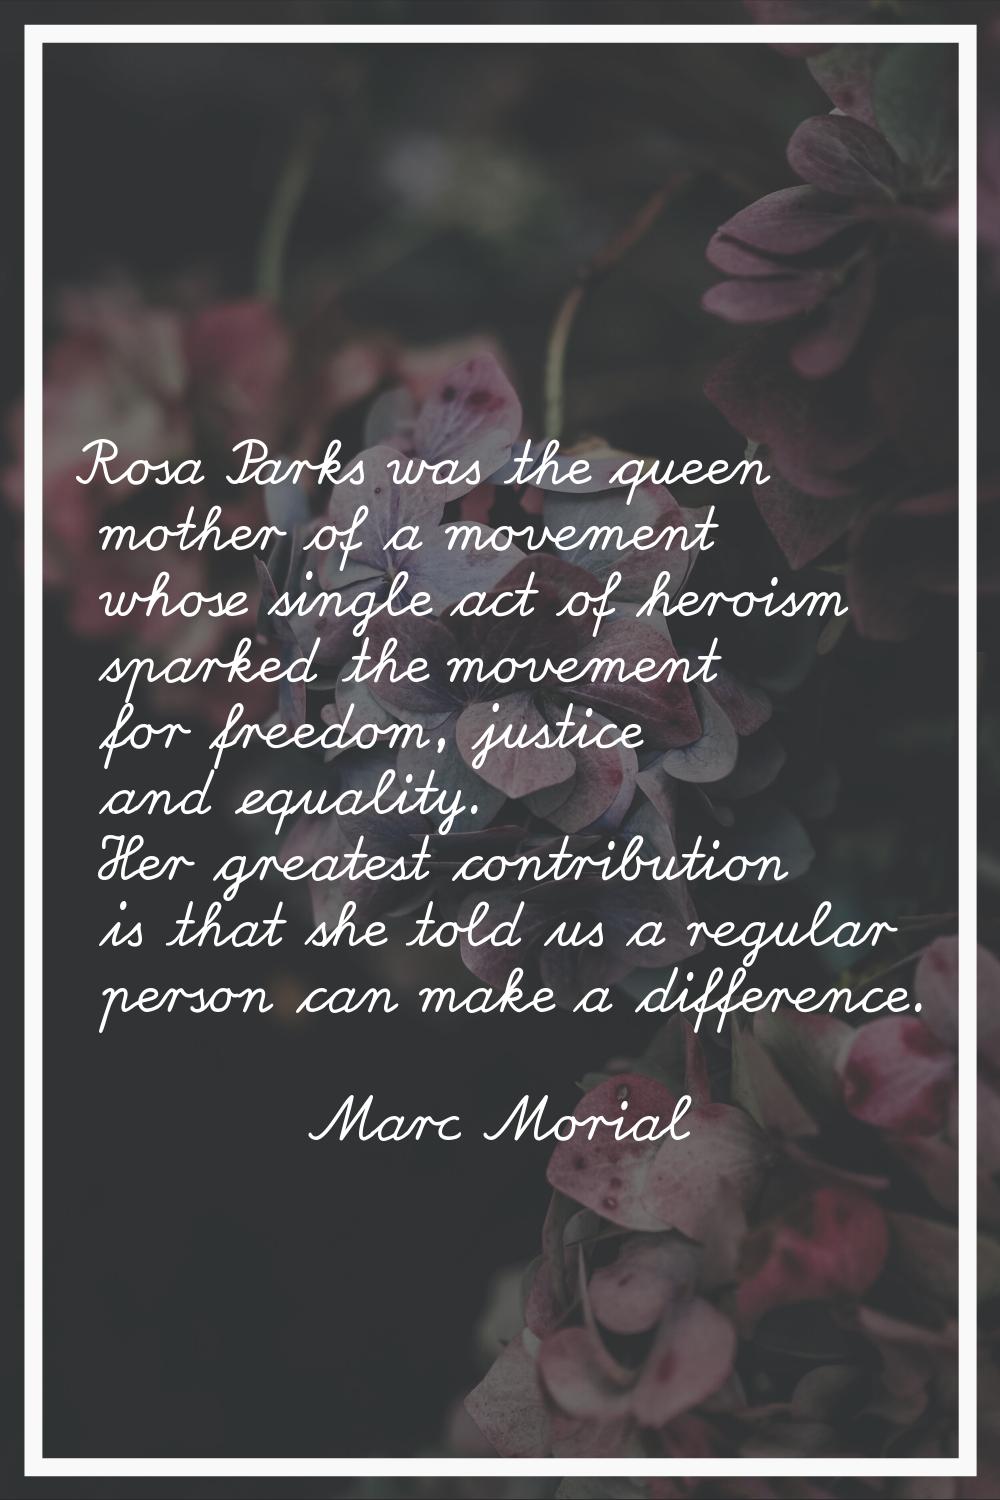 Rosa Parks was the queen mother of a movement whose single act of heroism sparked the movement for 